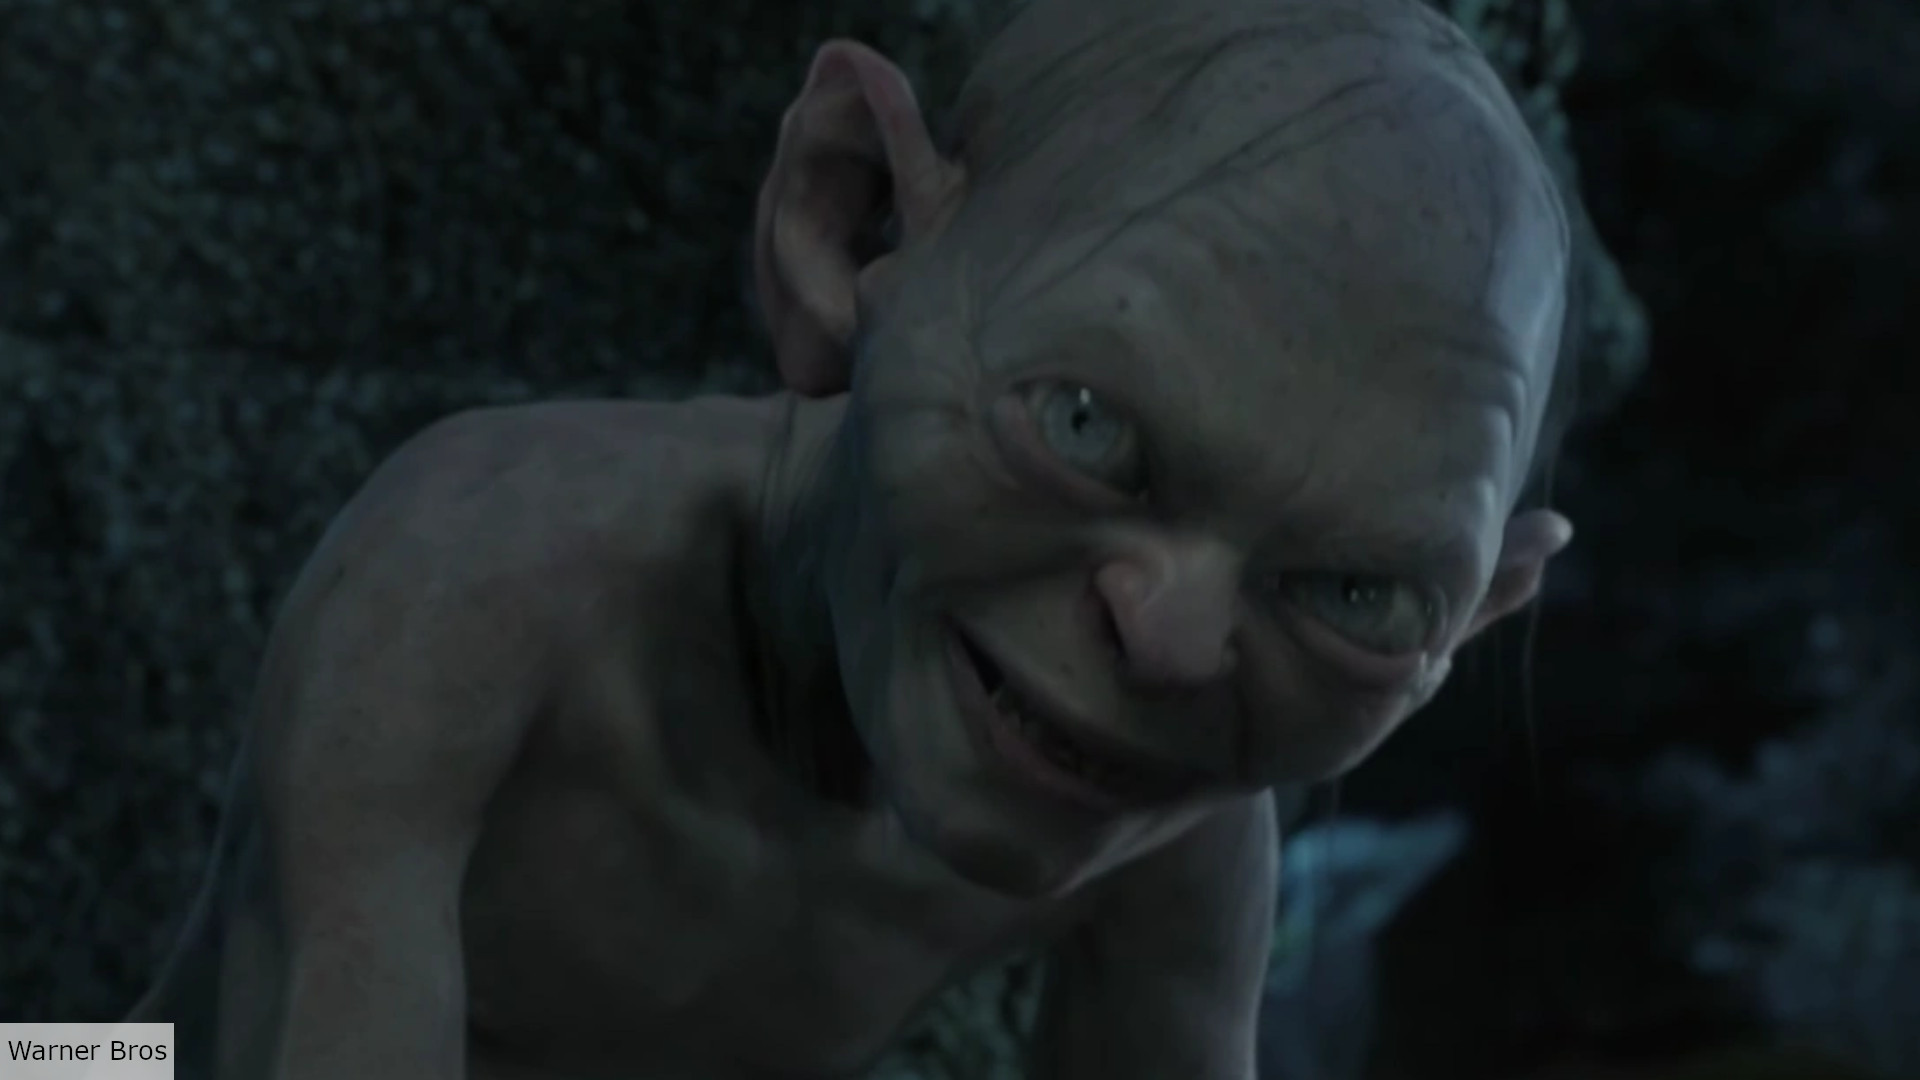 The Lord of the Rings: Gollum trailer features Mirkwood and Gandalf - EGM